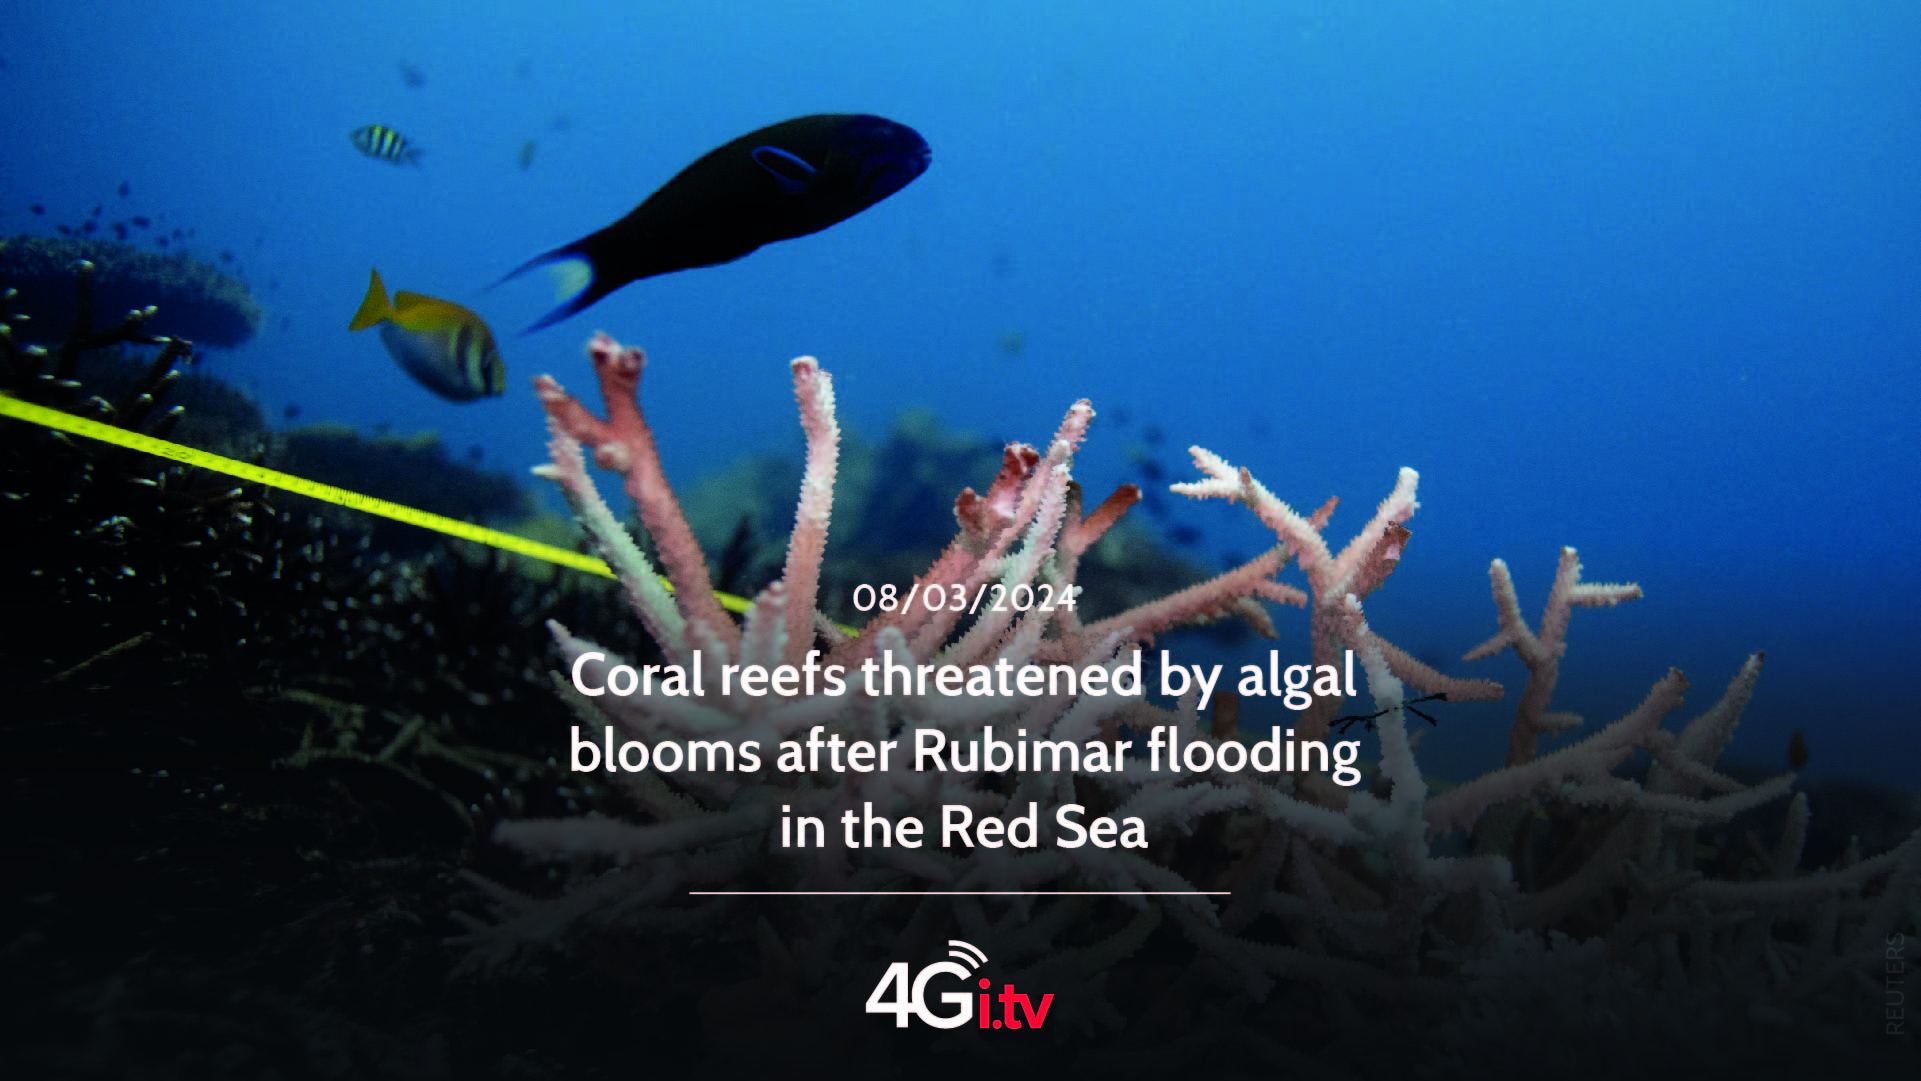 Подробнее о статье Coral reefs threatened by algal blooms after Rubimar flooding in the Red Sea